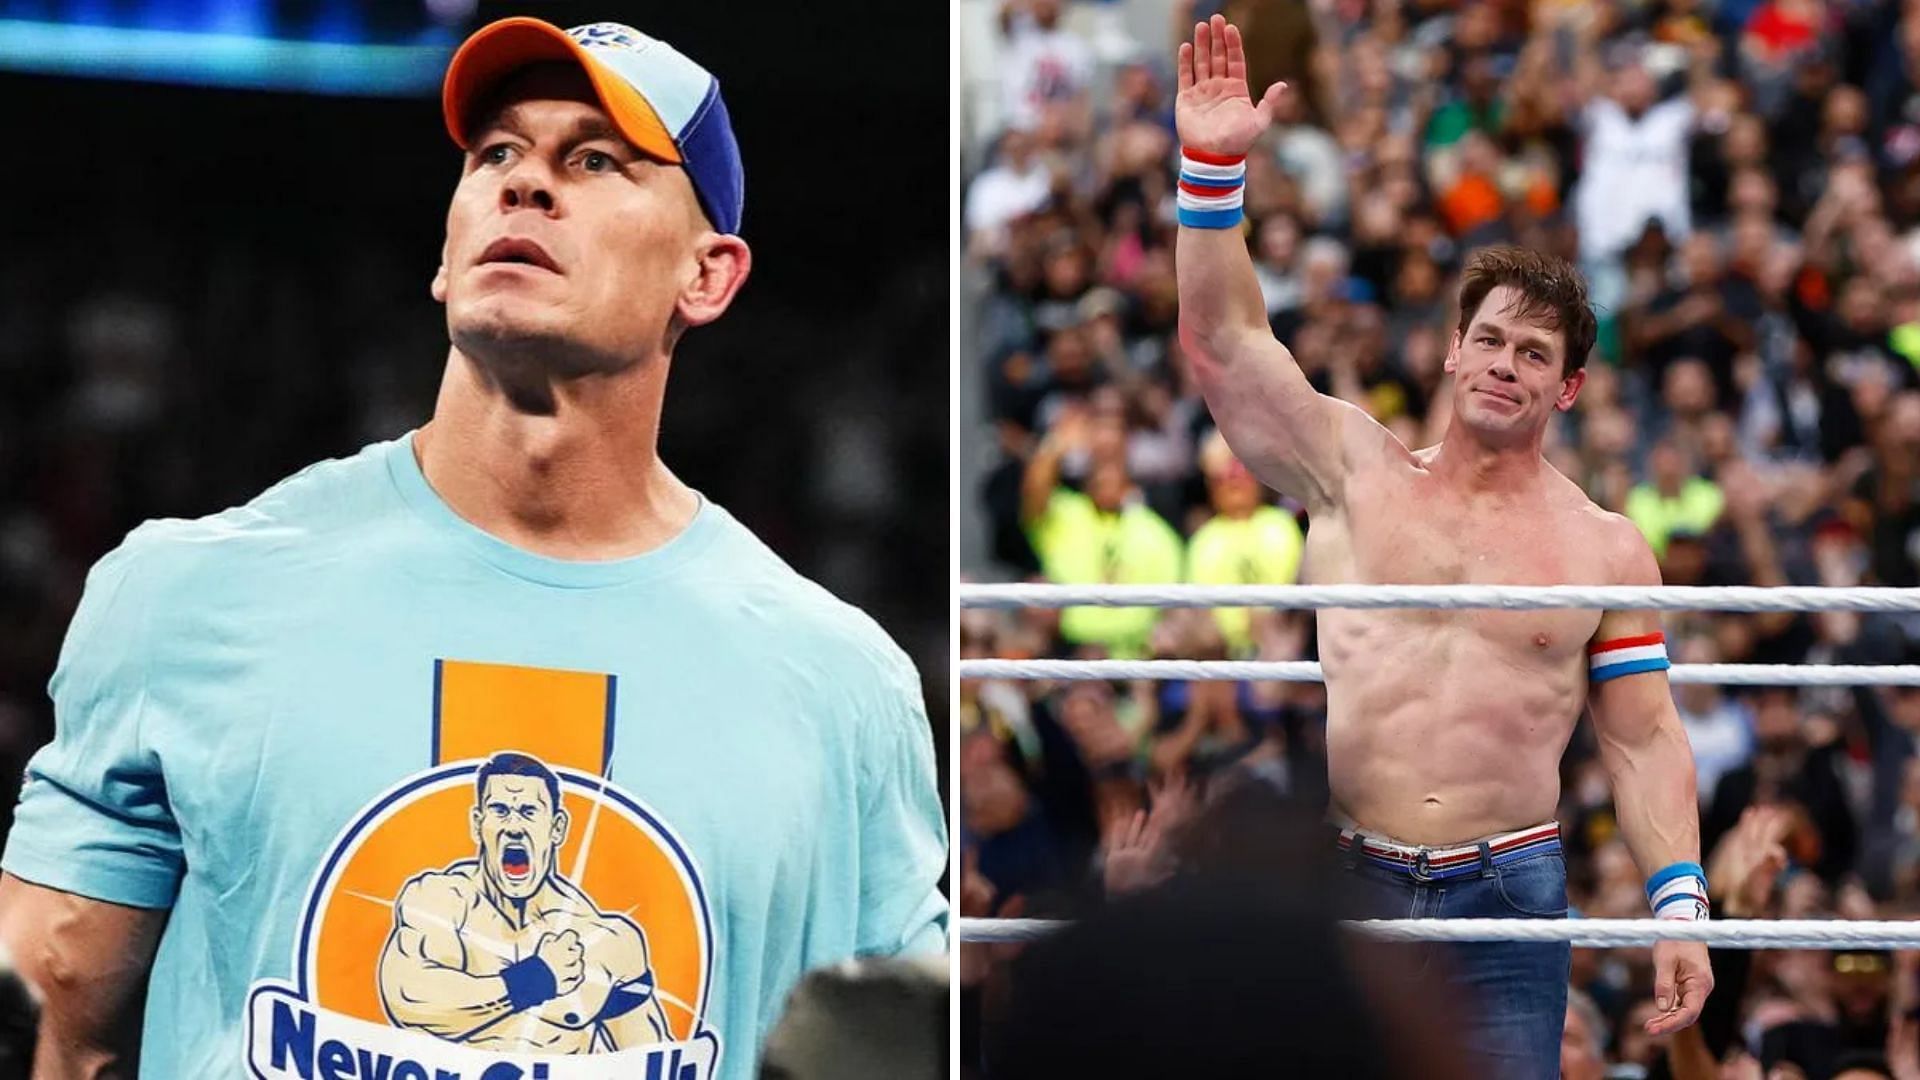 John Cena is promoted as The GOAT in WWE!